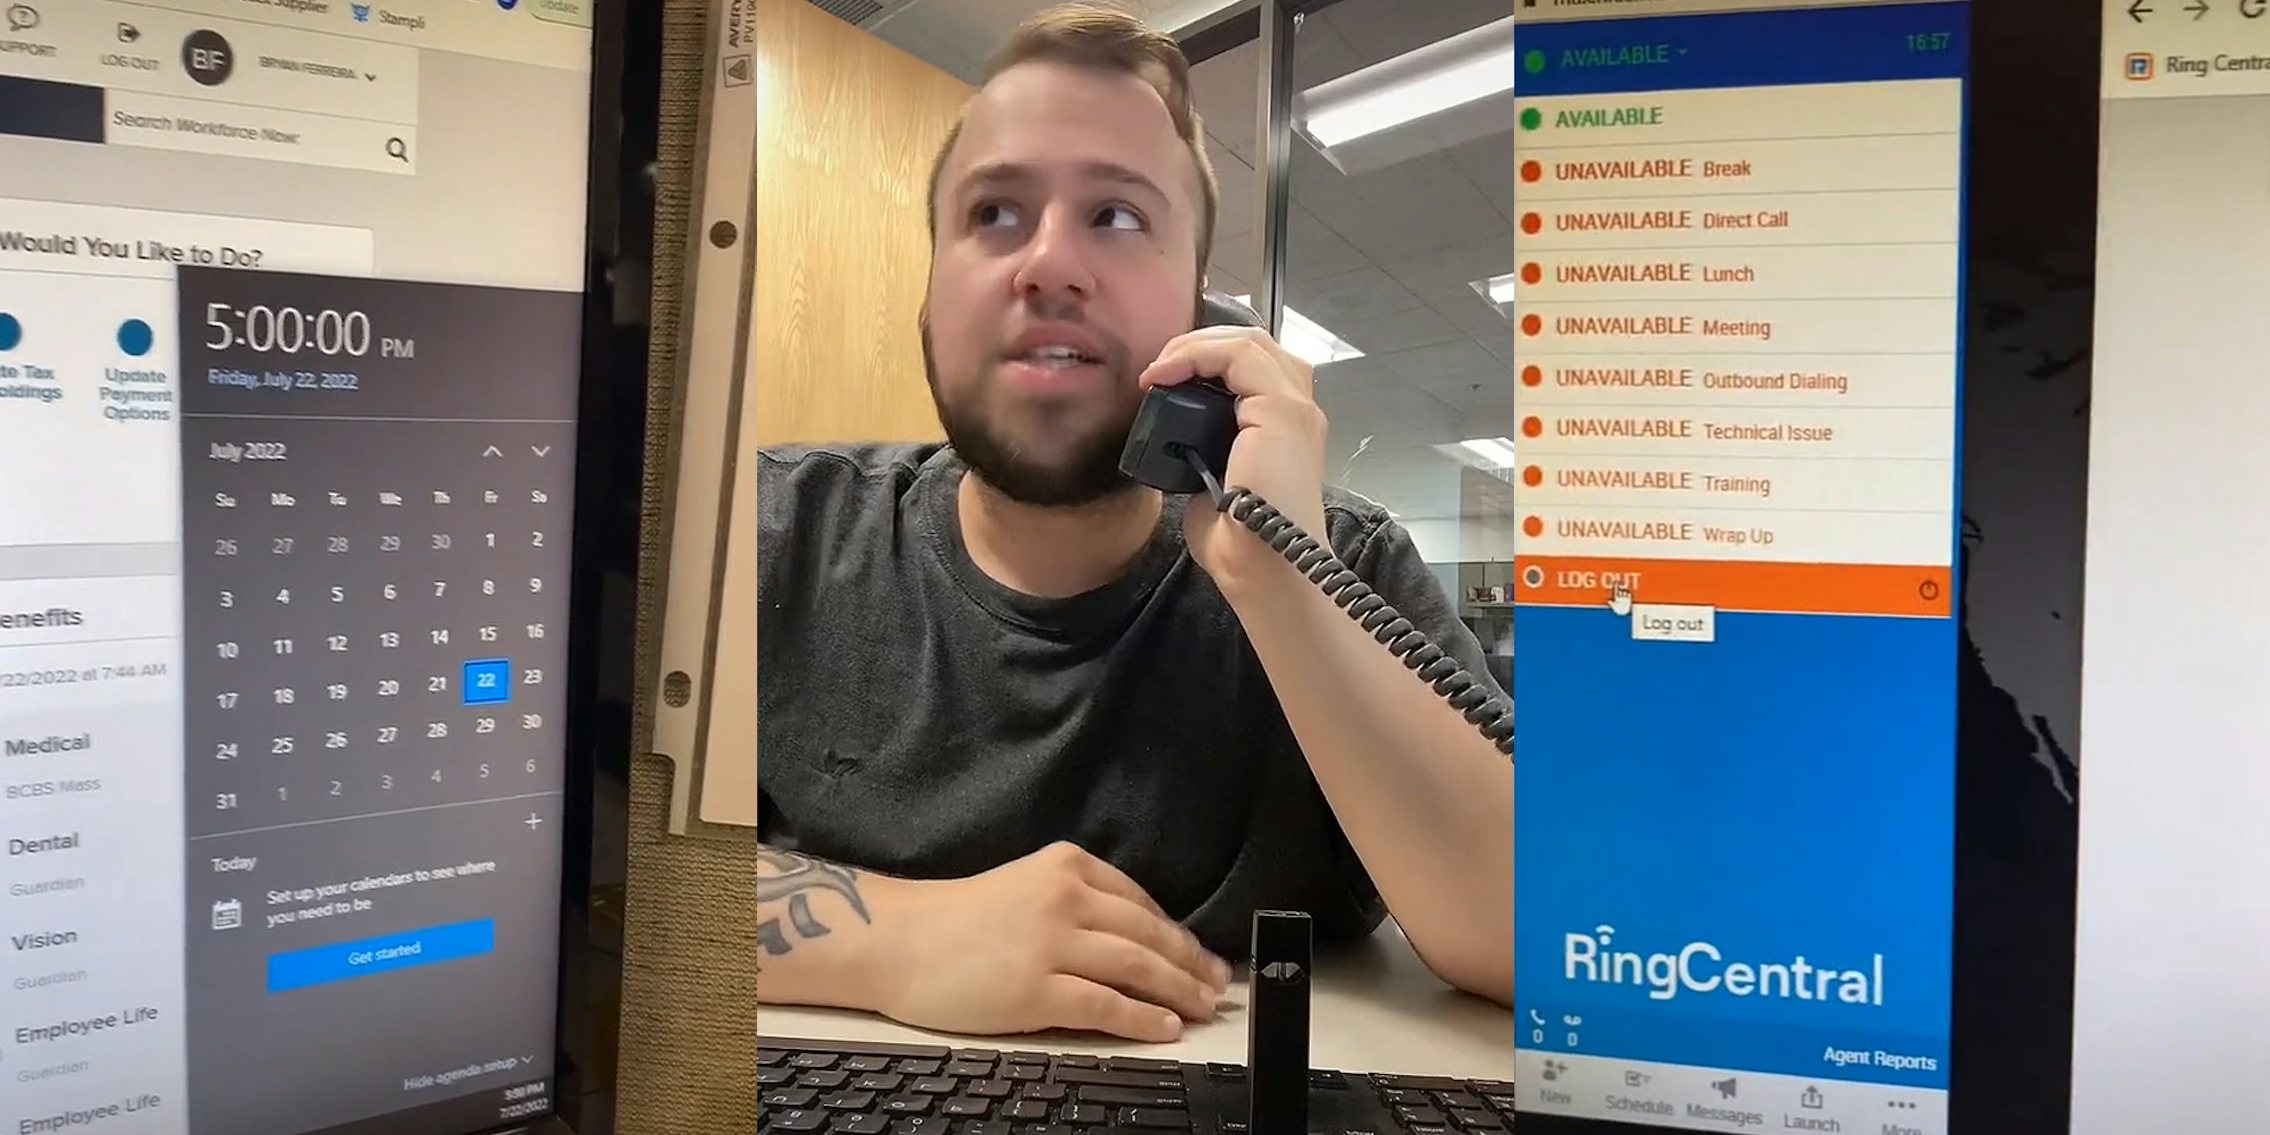 computer screen on clock at 5:00:00 (l) man on phone (c) computer screen on RingCentral sidebar cursor selecting LOG OUT (r)